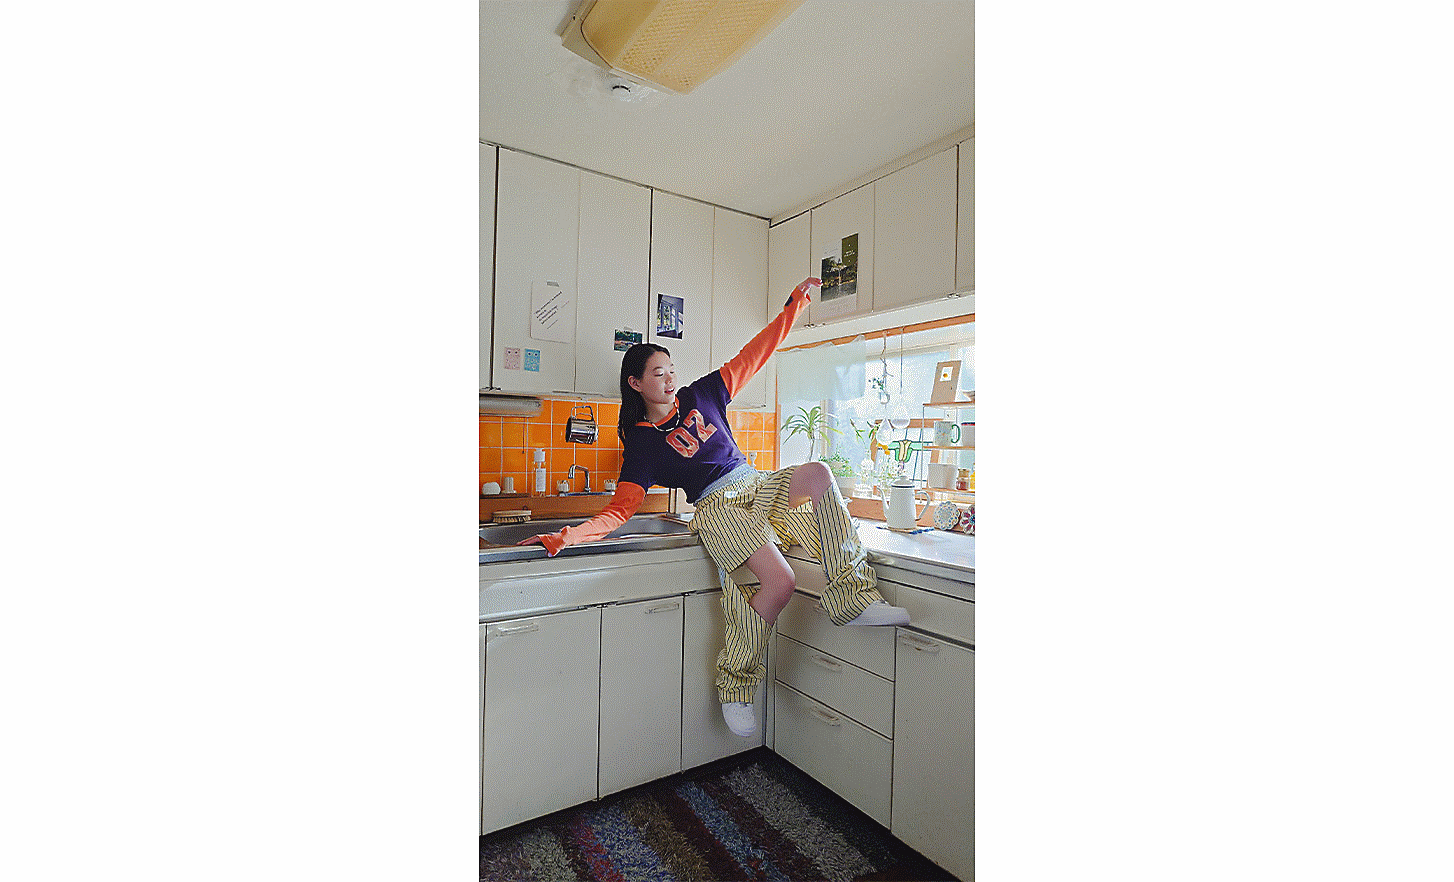 Image of a person posing on their kitchen units